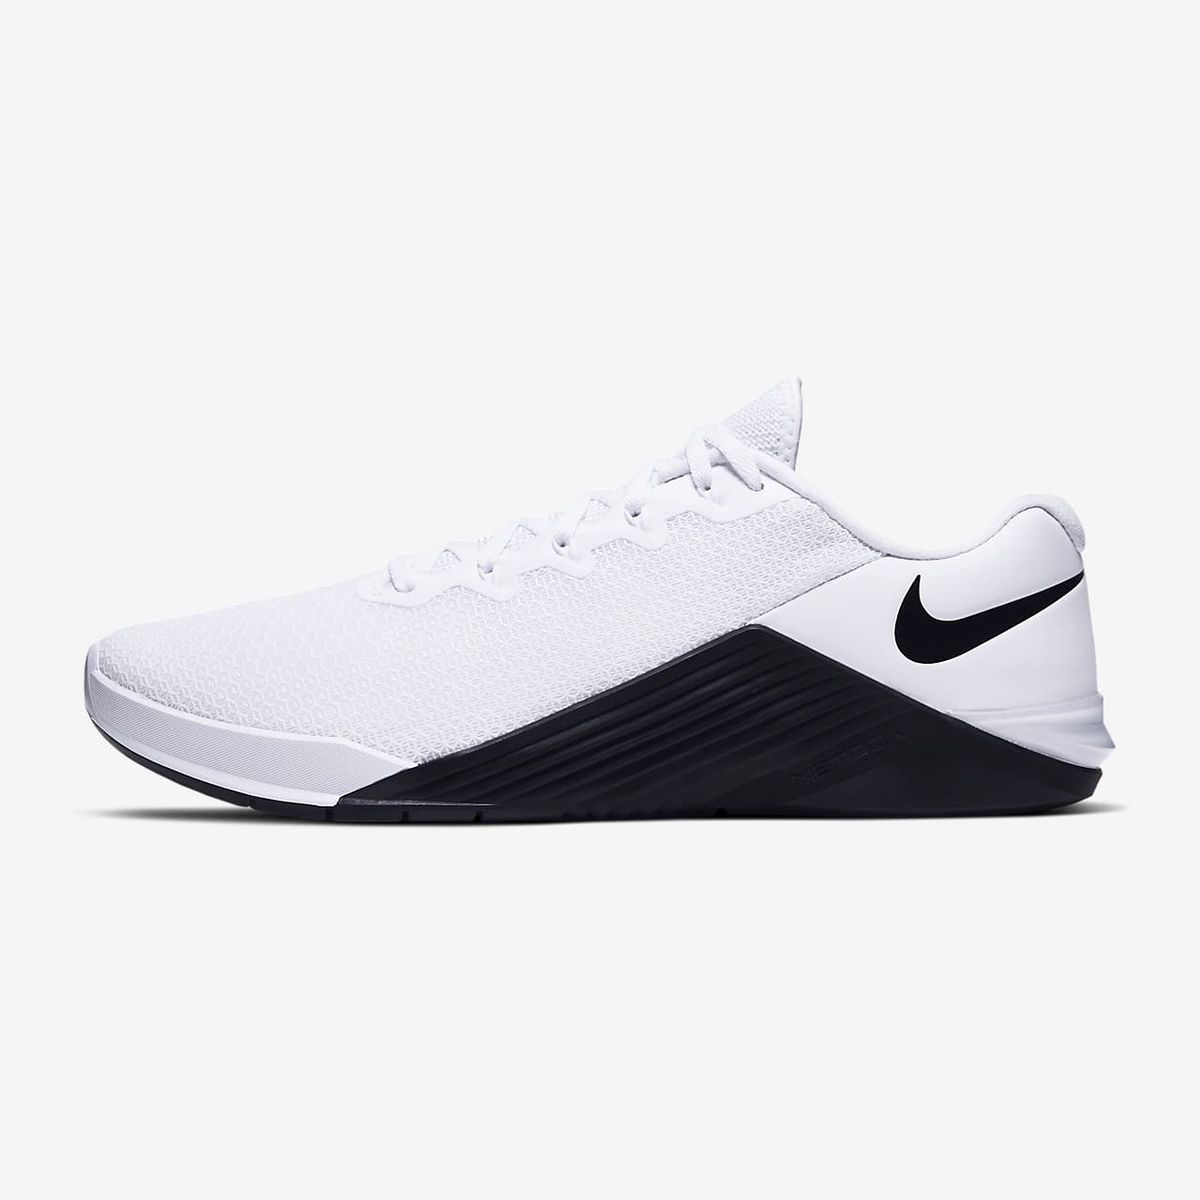 25 black nike training shoes womens Best Things to Buy From Nike 2022 | The Strategist